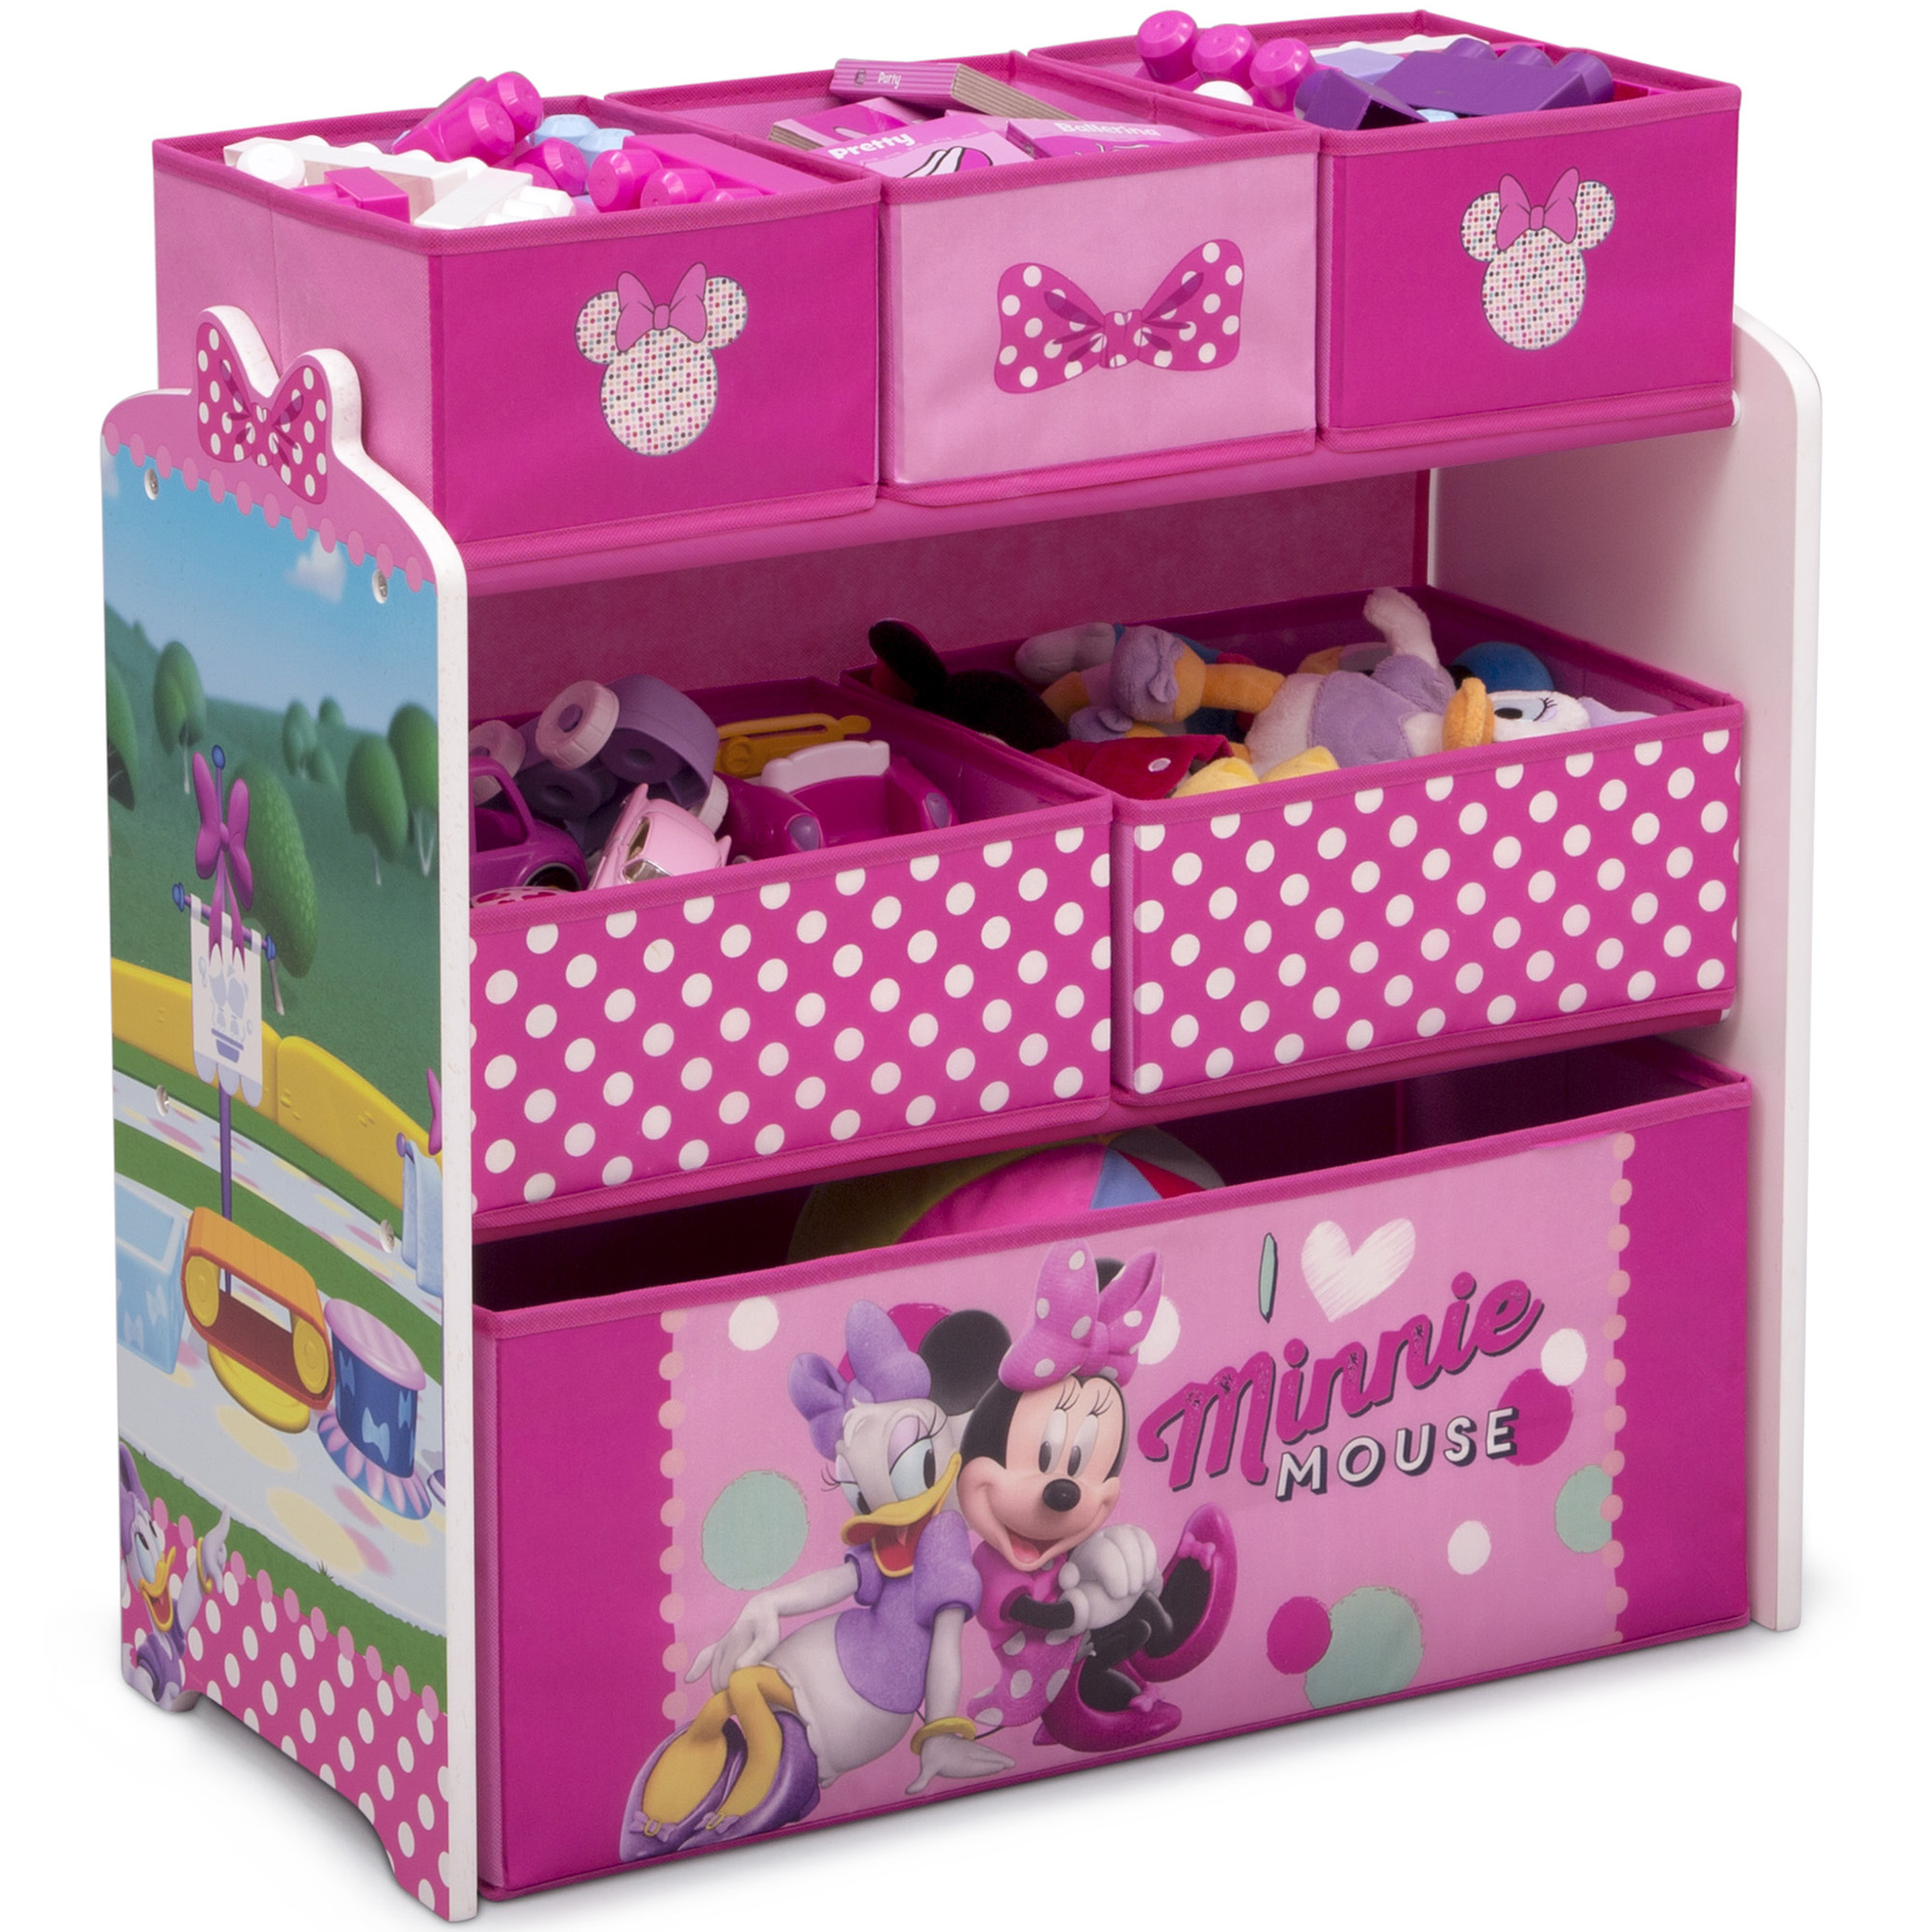 Minnie Mouse 4-Piece Wood Toddler Playroom Set – Includes Table, 2 Chairs & Toy Bin, Pink - image 7 of 13